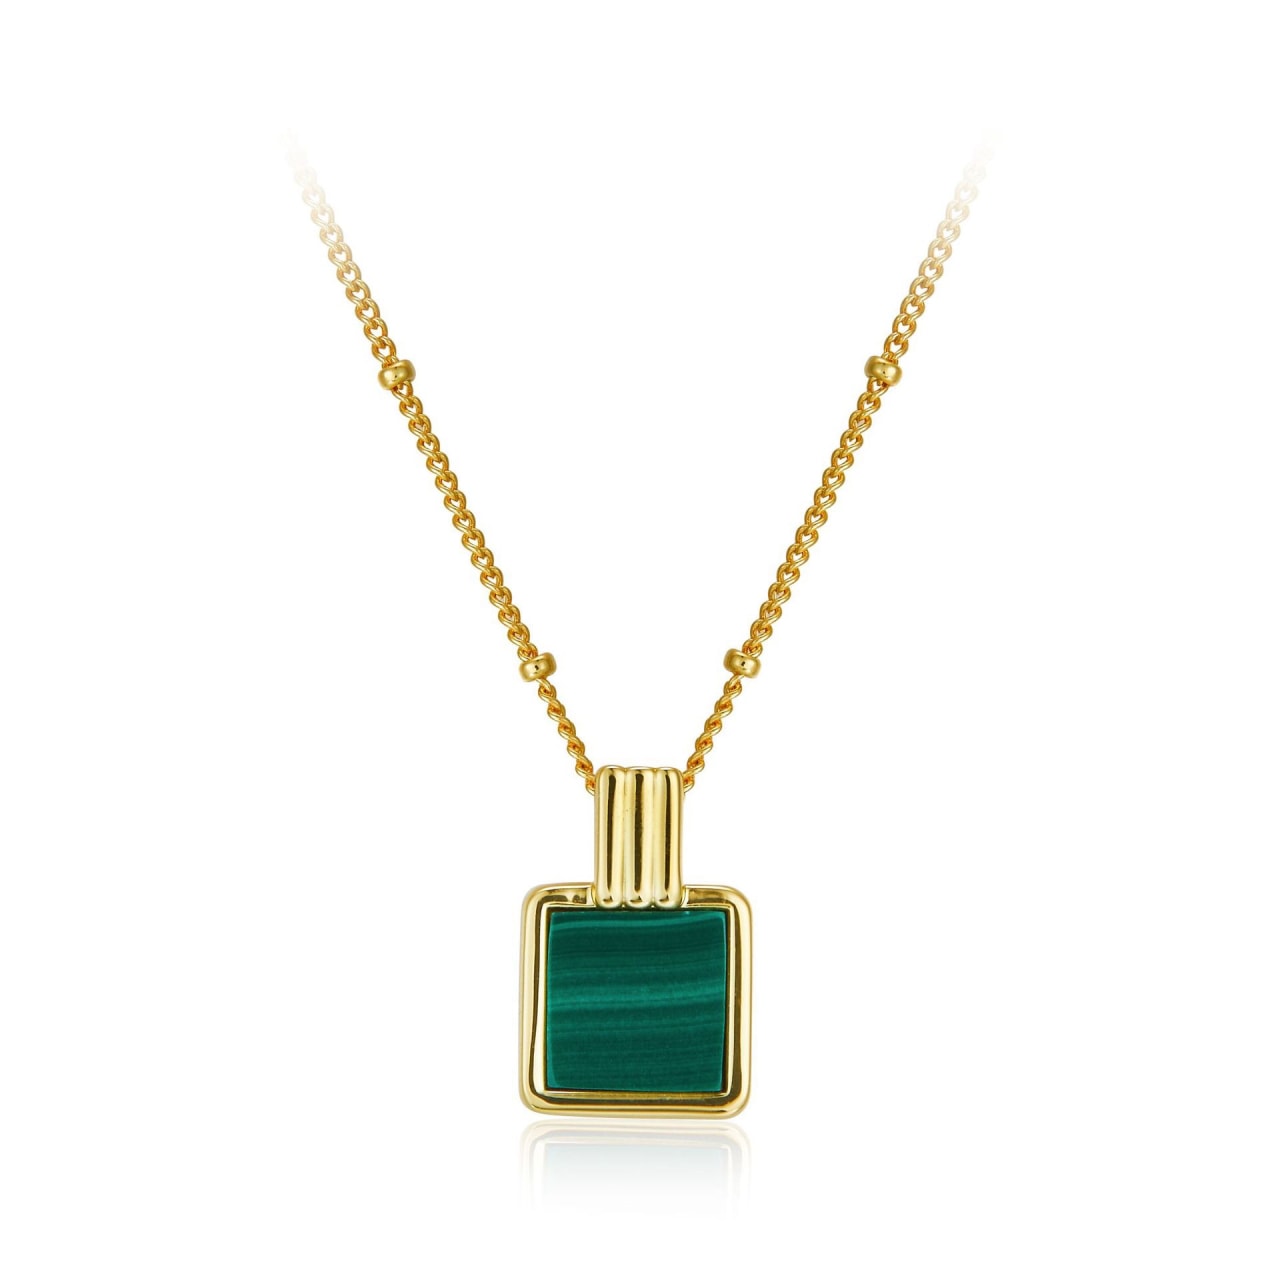 Natural Malachite 18k Gold Plated Pendant Clavicle Chain Necklace - NEVAEH